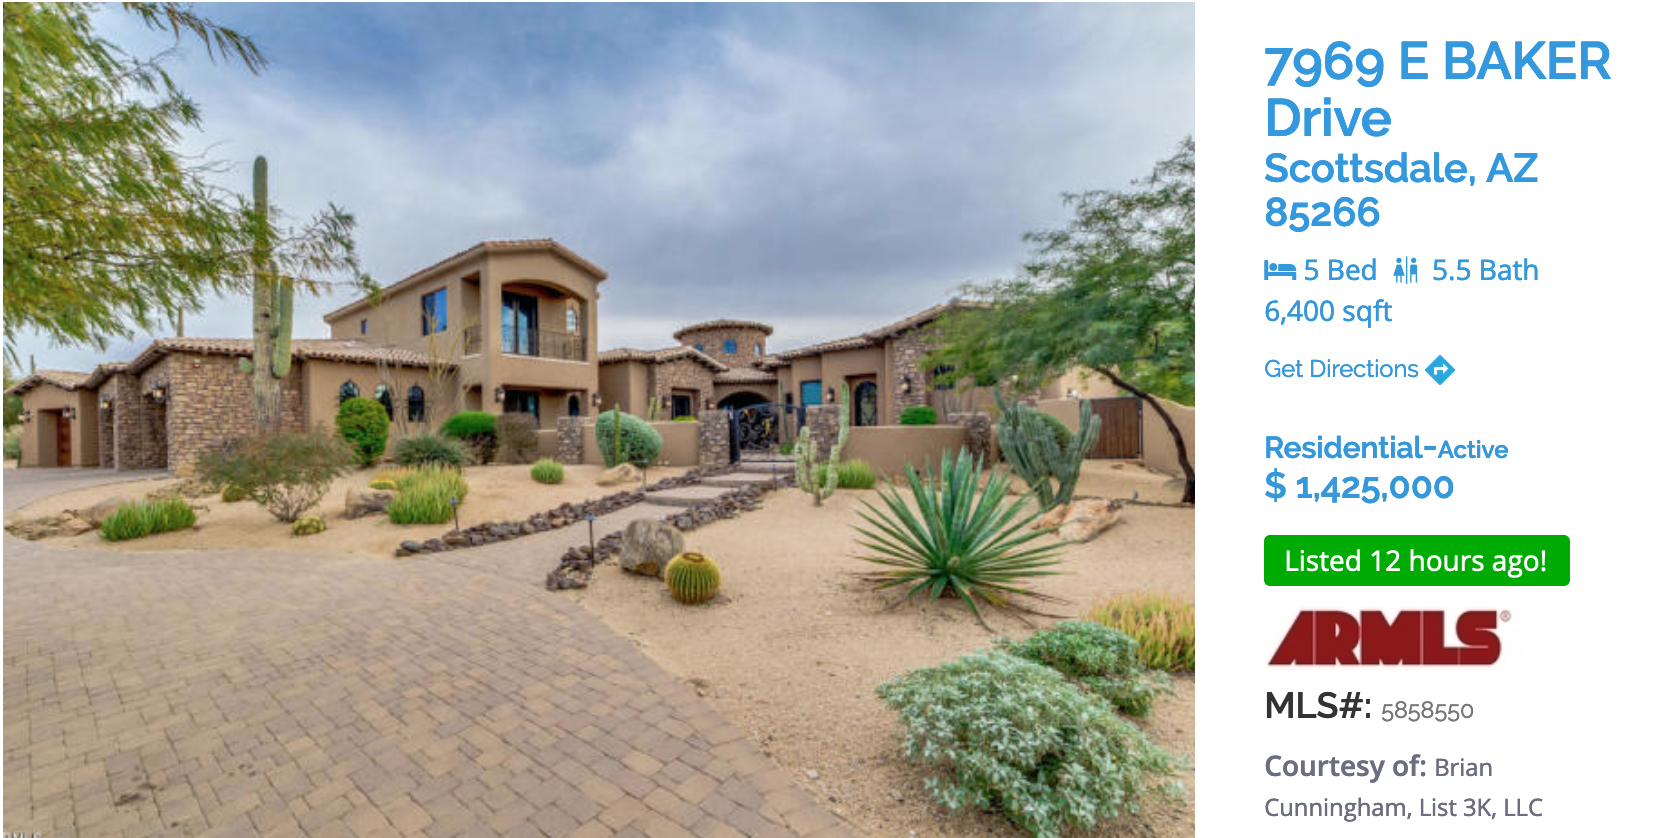 SCOTTSDALE FEATURED HOME